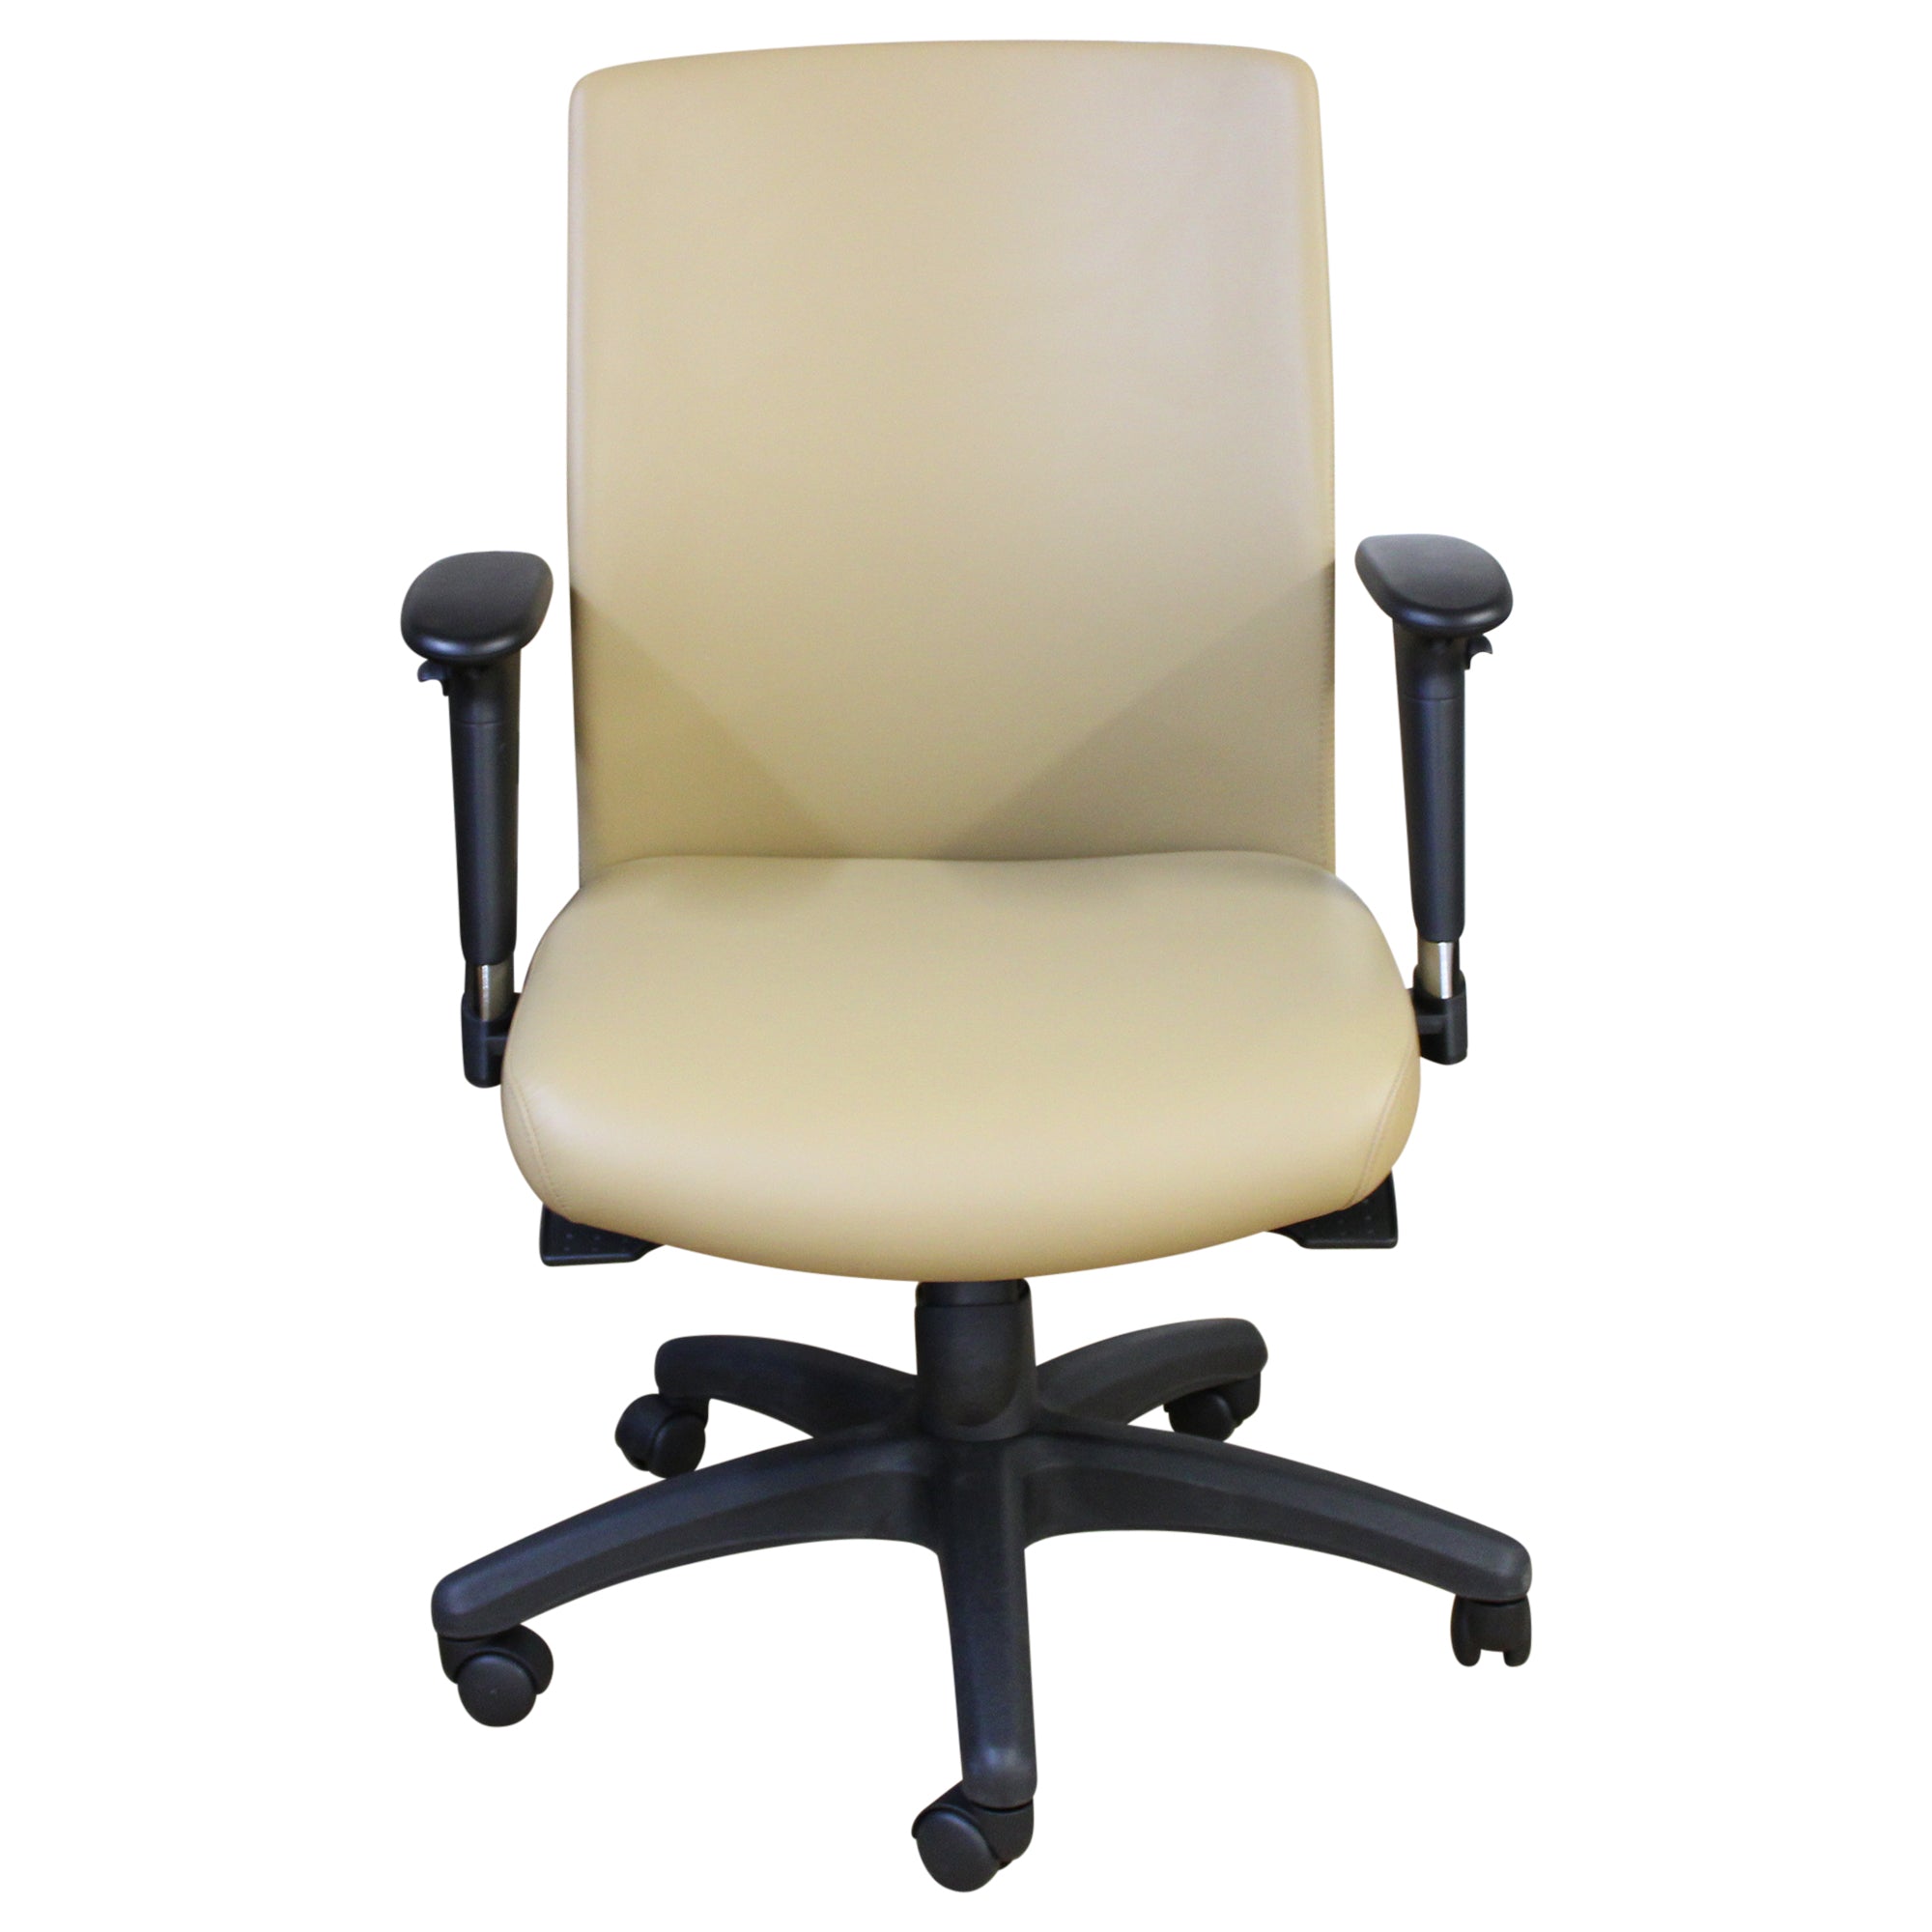 Compel Pinnacle Task Chair - Dune - New CLOSEOUT